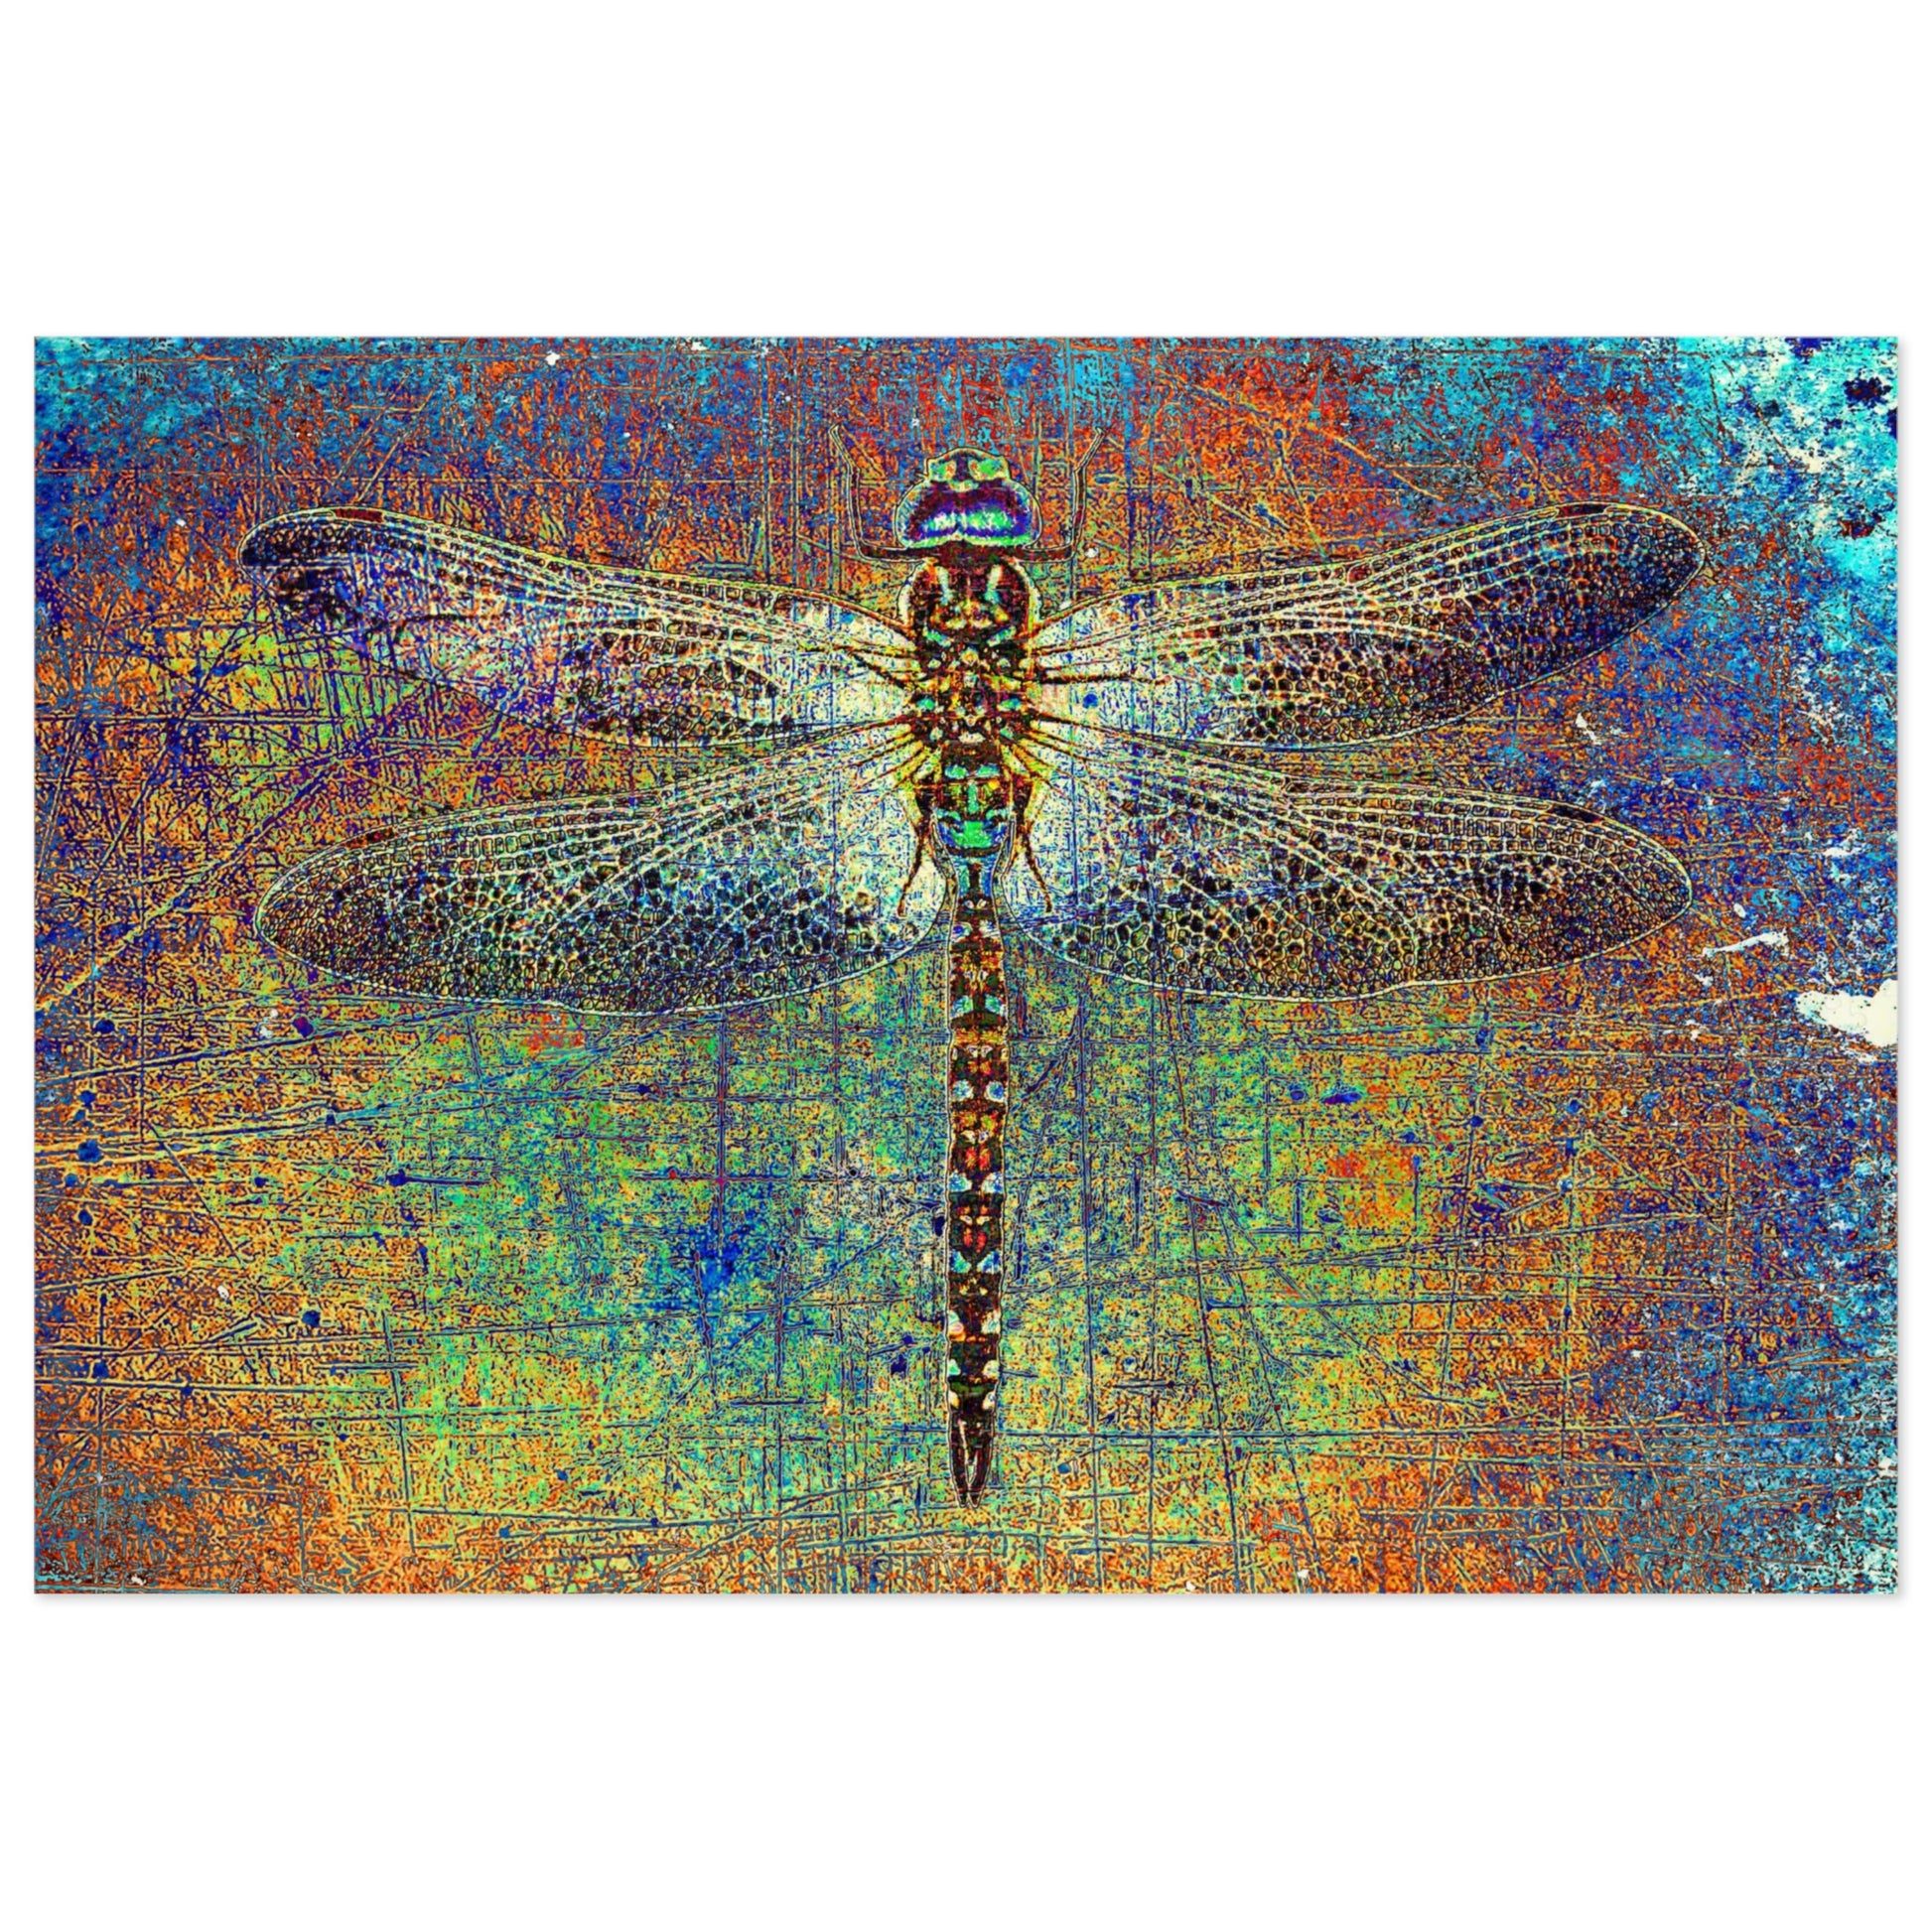 Dragonfly Themed Puzzle and Game - Dragonfly on Multicolor Background 1000 Pieces